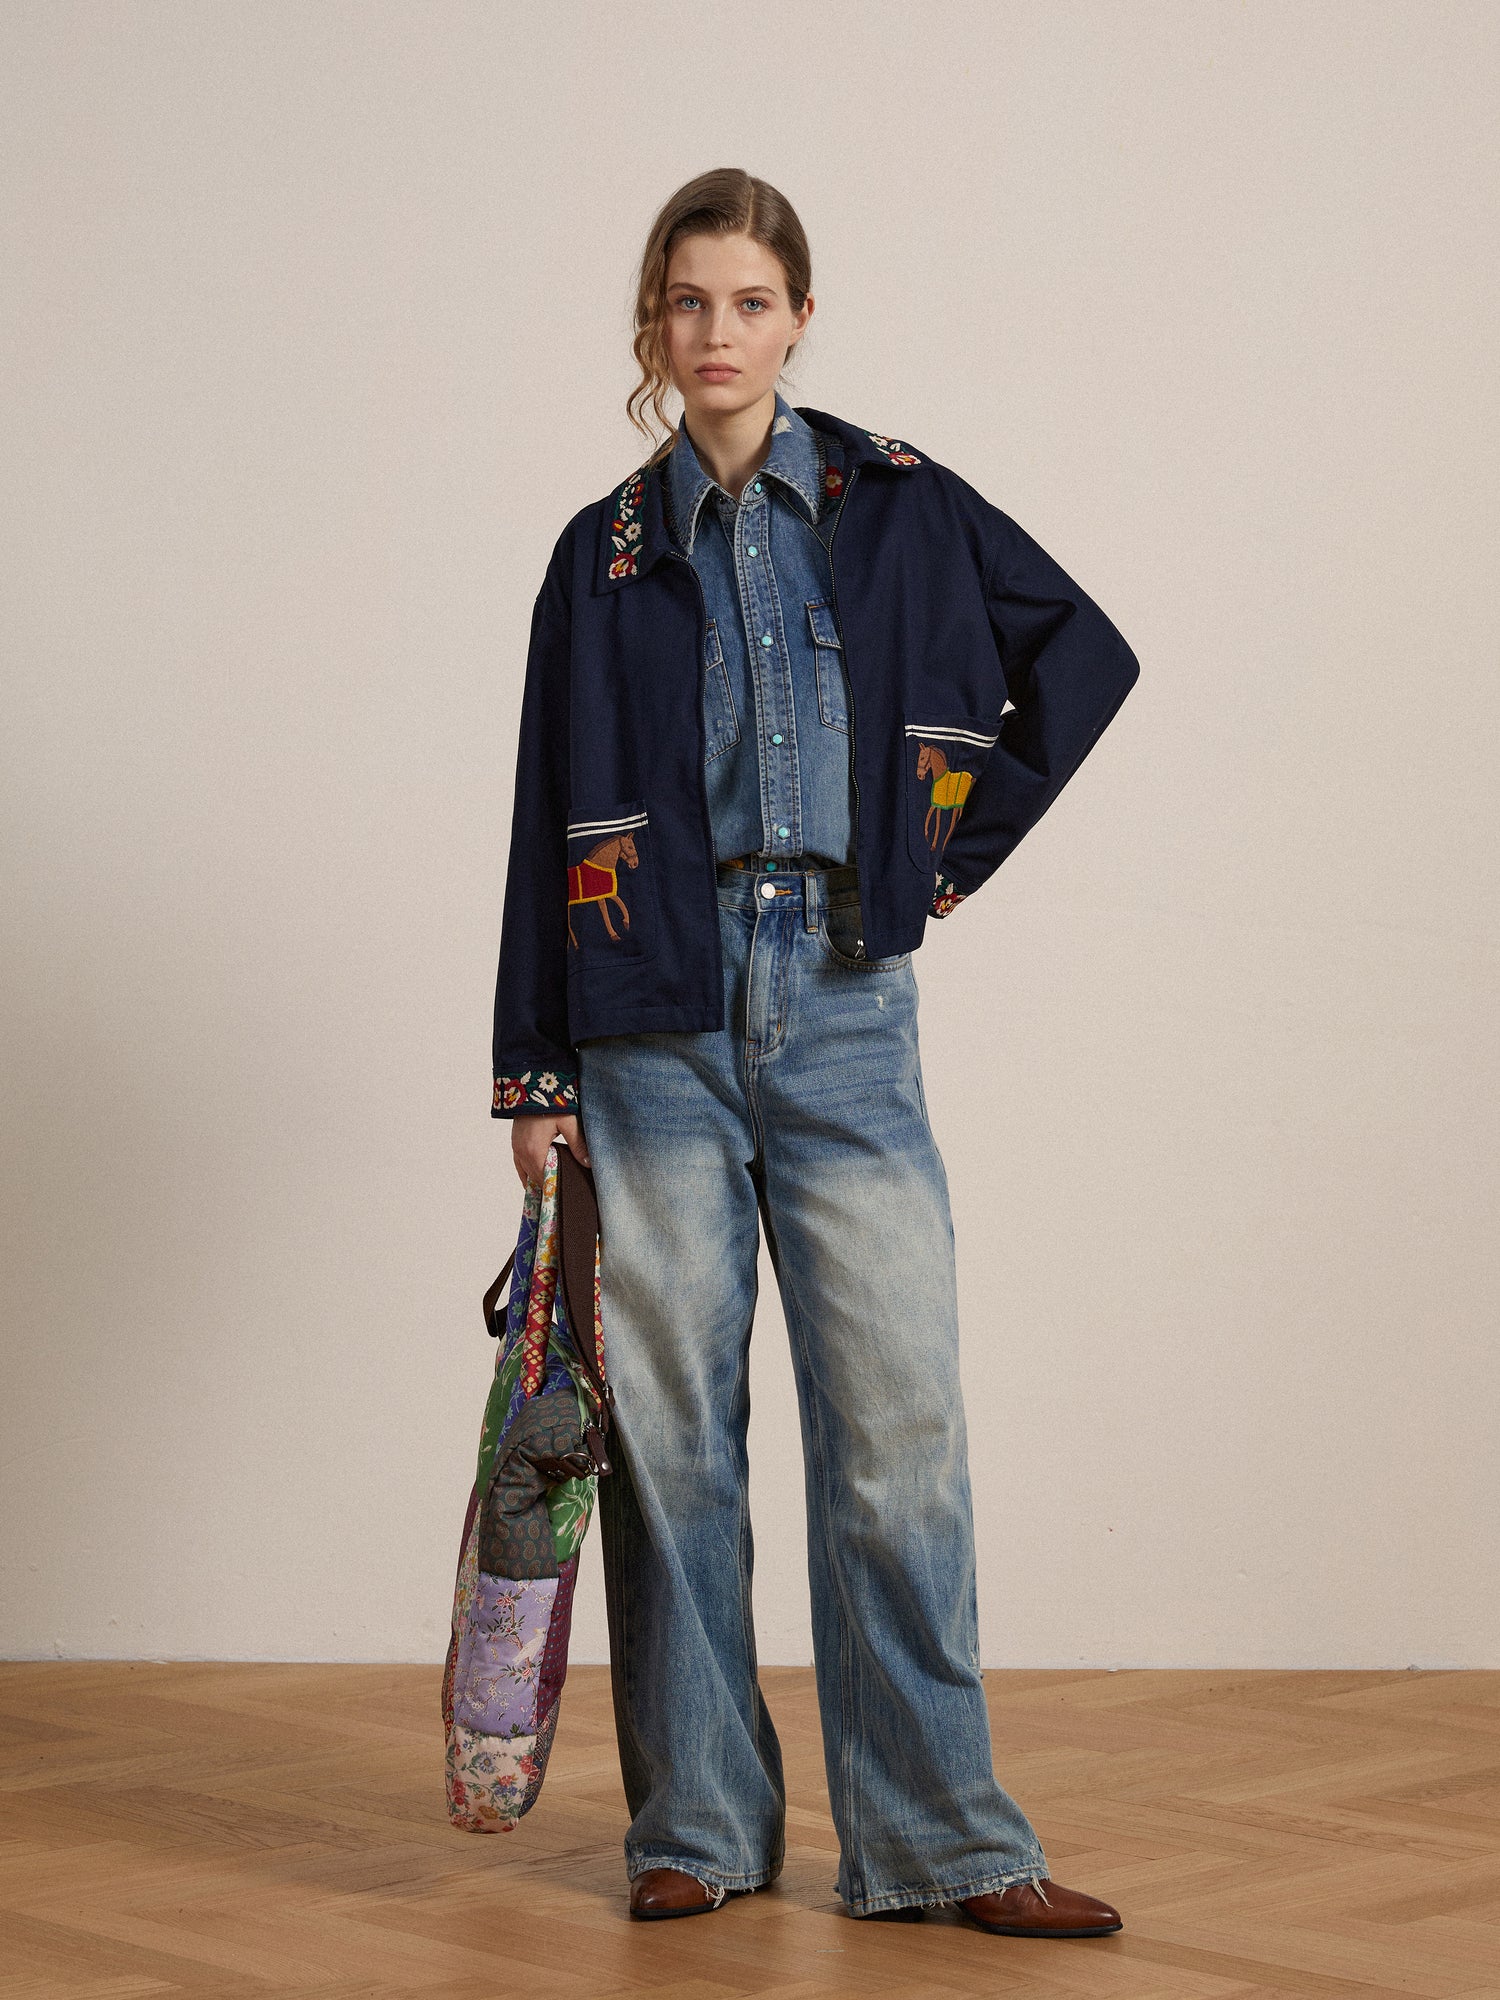 A woman in a denim outfit stands with her hands in her pockets, holding a colorful bag. She wears wide-legged jeans adorned with detailed embroidery, a Found Horse Equine Work Jacket, and brown shoes.